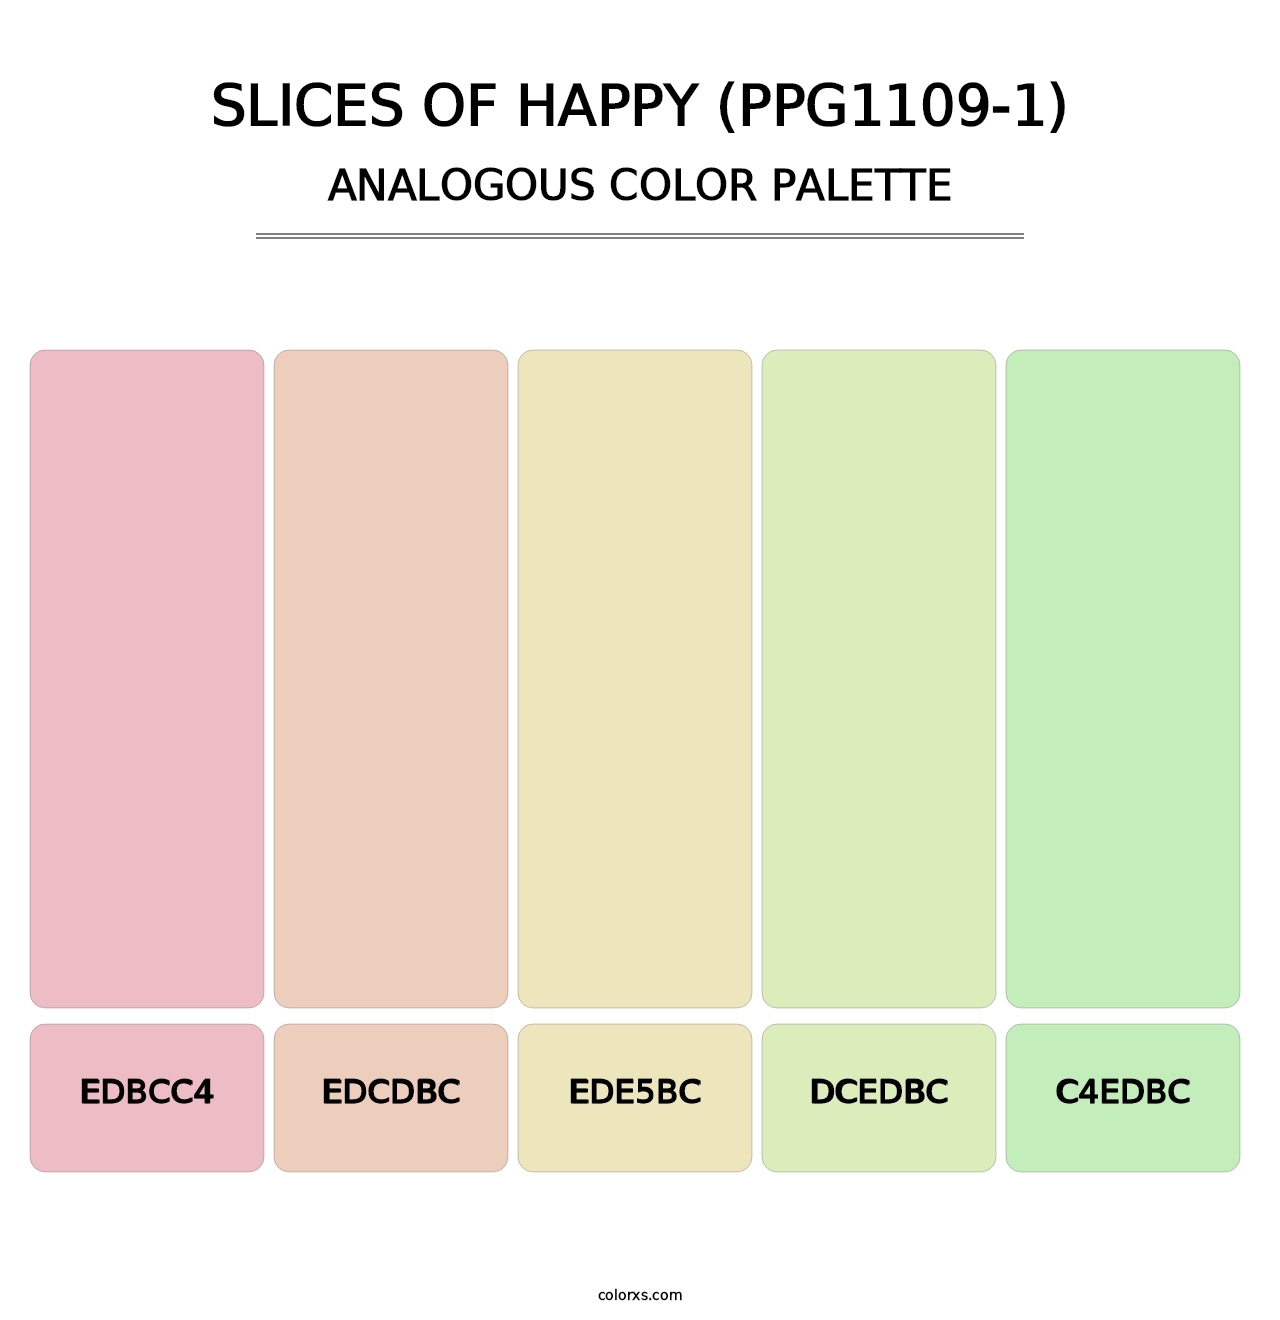 Slices Of Happy (PPG1109-1) - Analogous Color Palette